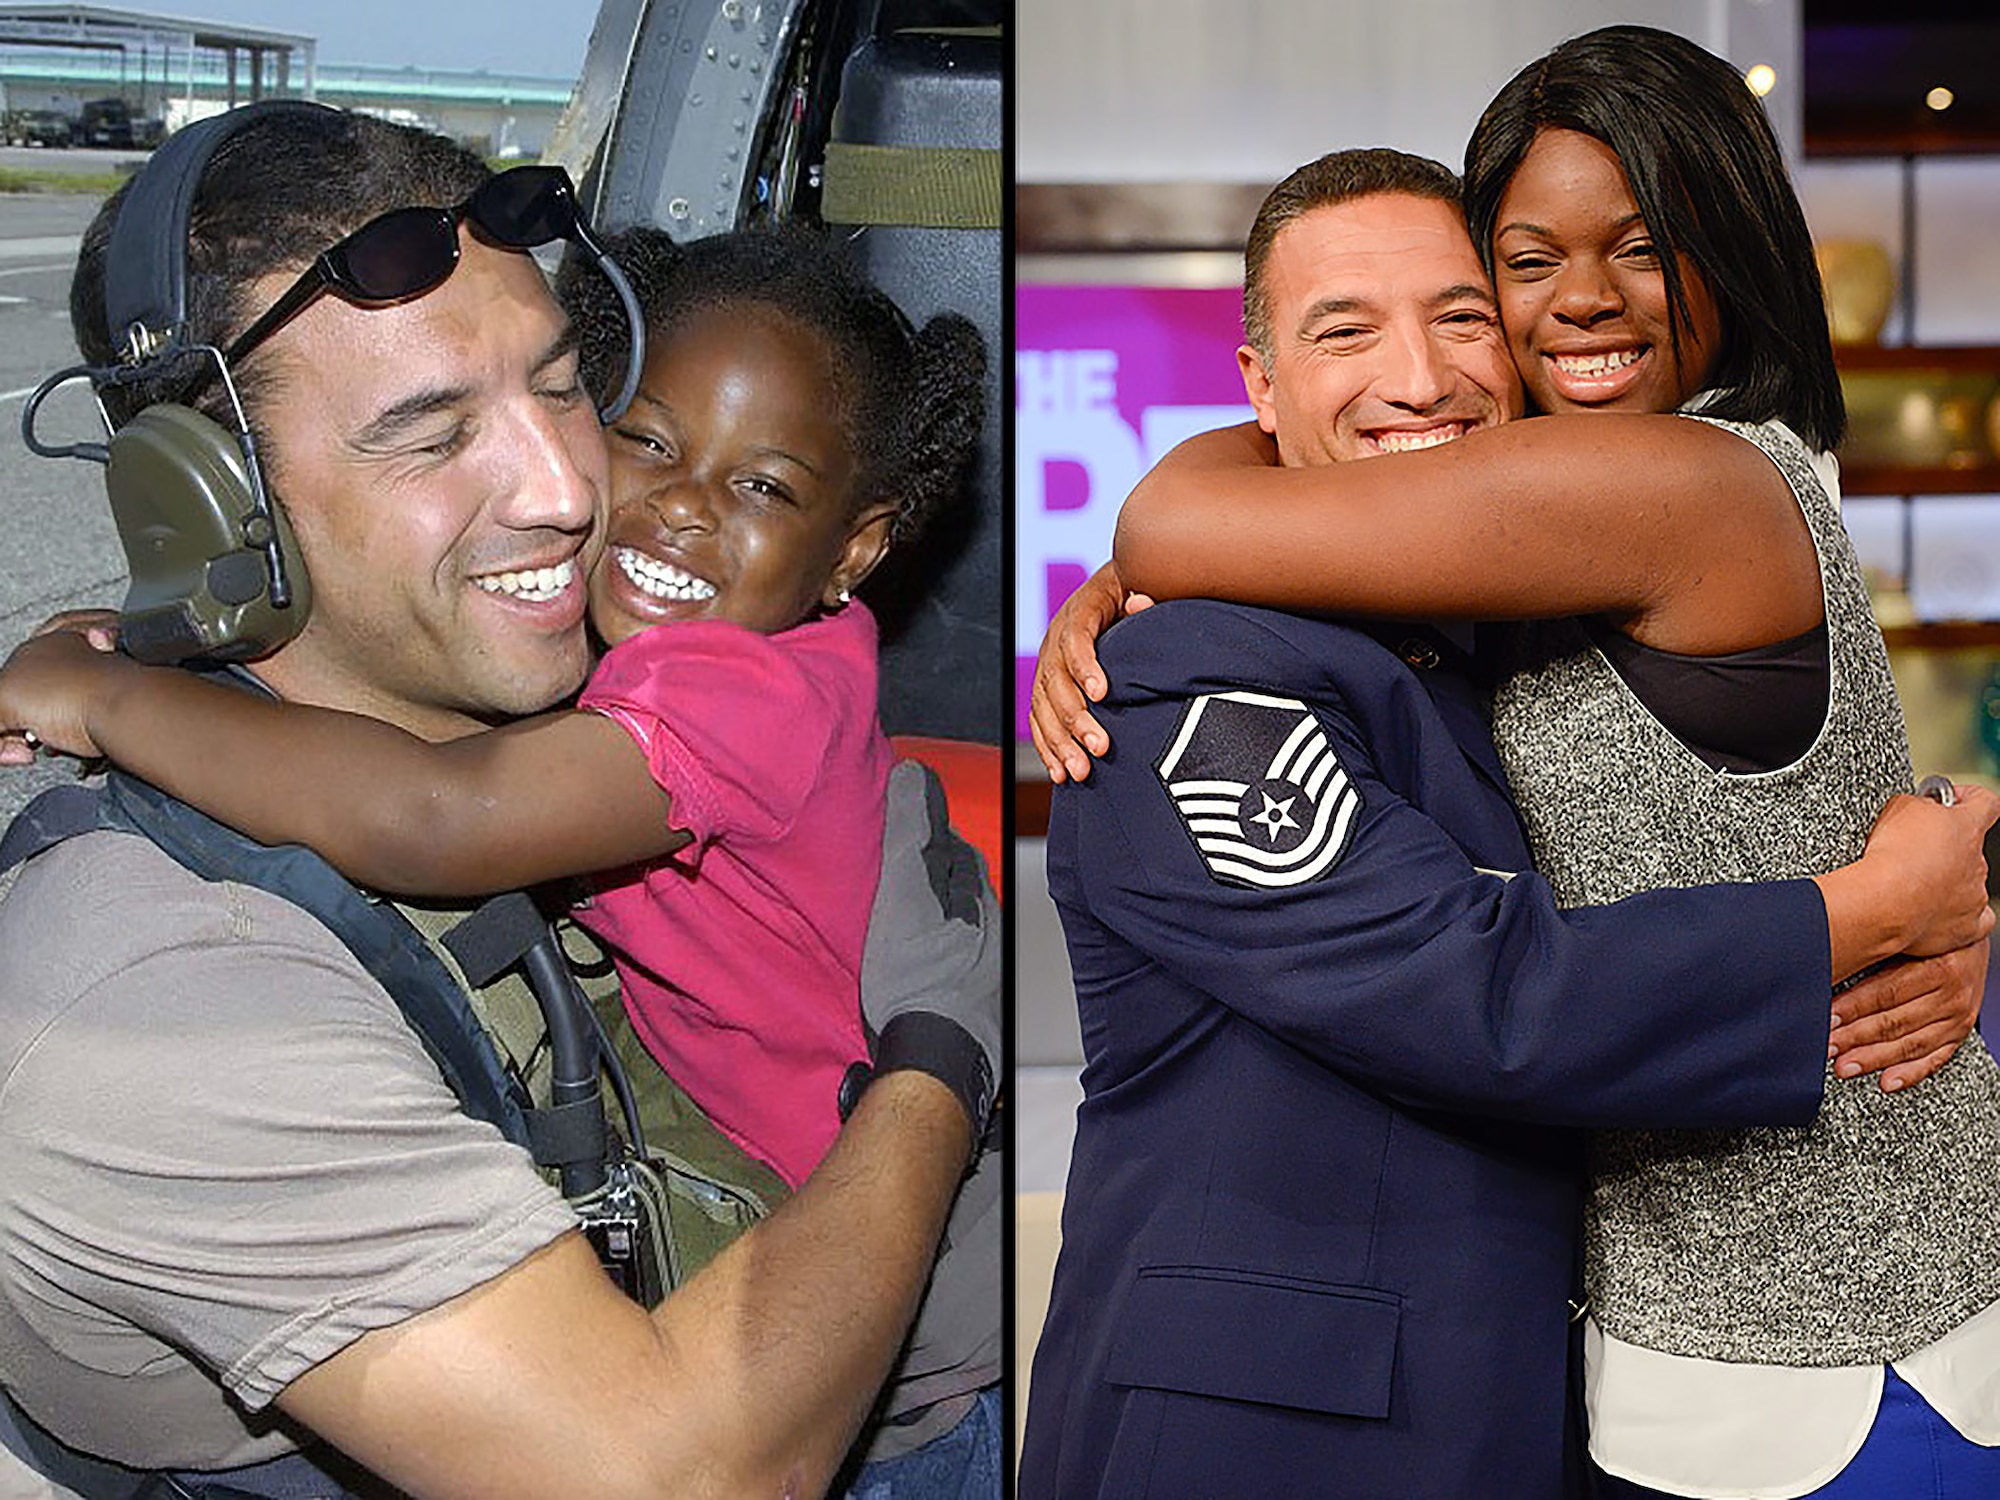 Left: Master Sgt. Mike Maroney embraces 3-yar-old LeShay Brown after rescuing her and her family from a New Orleans rooftop after Hurricane Katrina in 2005. Right: Mahroney and 13-year-old Brown reunite after a 10-year search by Maroney to find the girl who's smile and hug helped him through the difficulties of the rescue effort. (U.S. Air Force photo/Airman First class Veronica Pierce/Waner Brothers photo/Erica Parise)